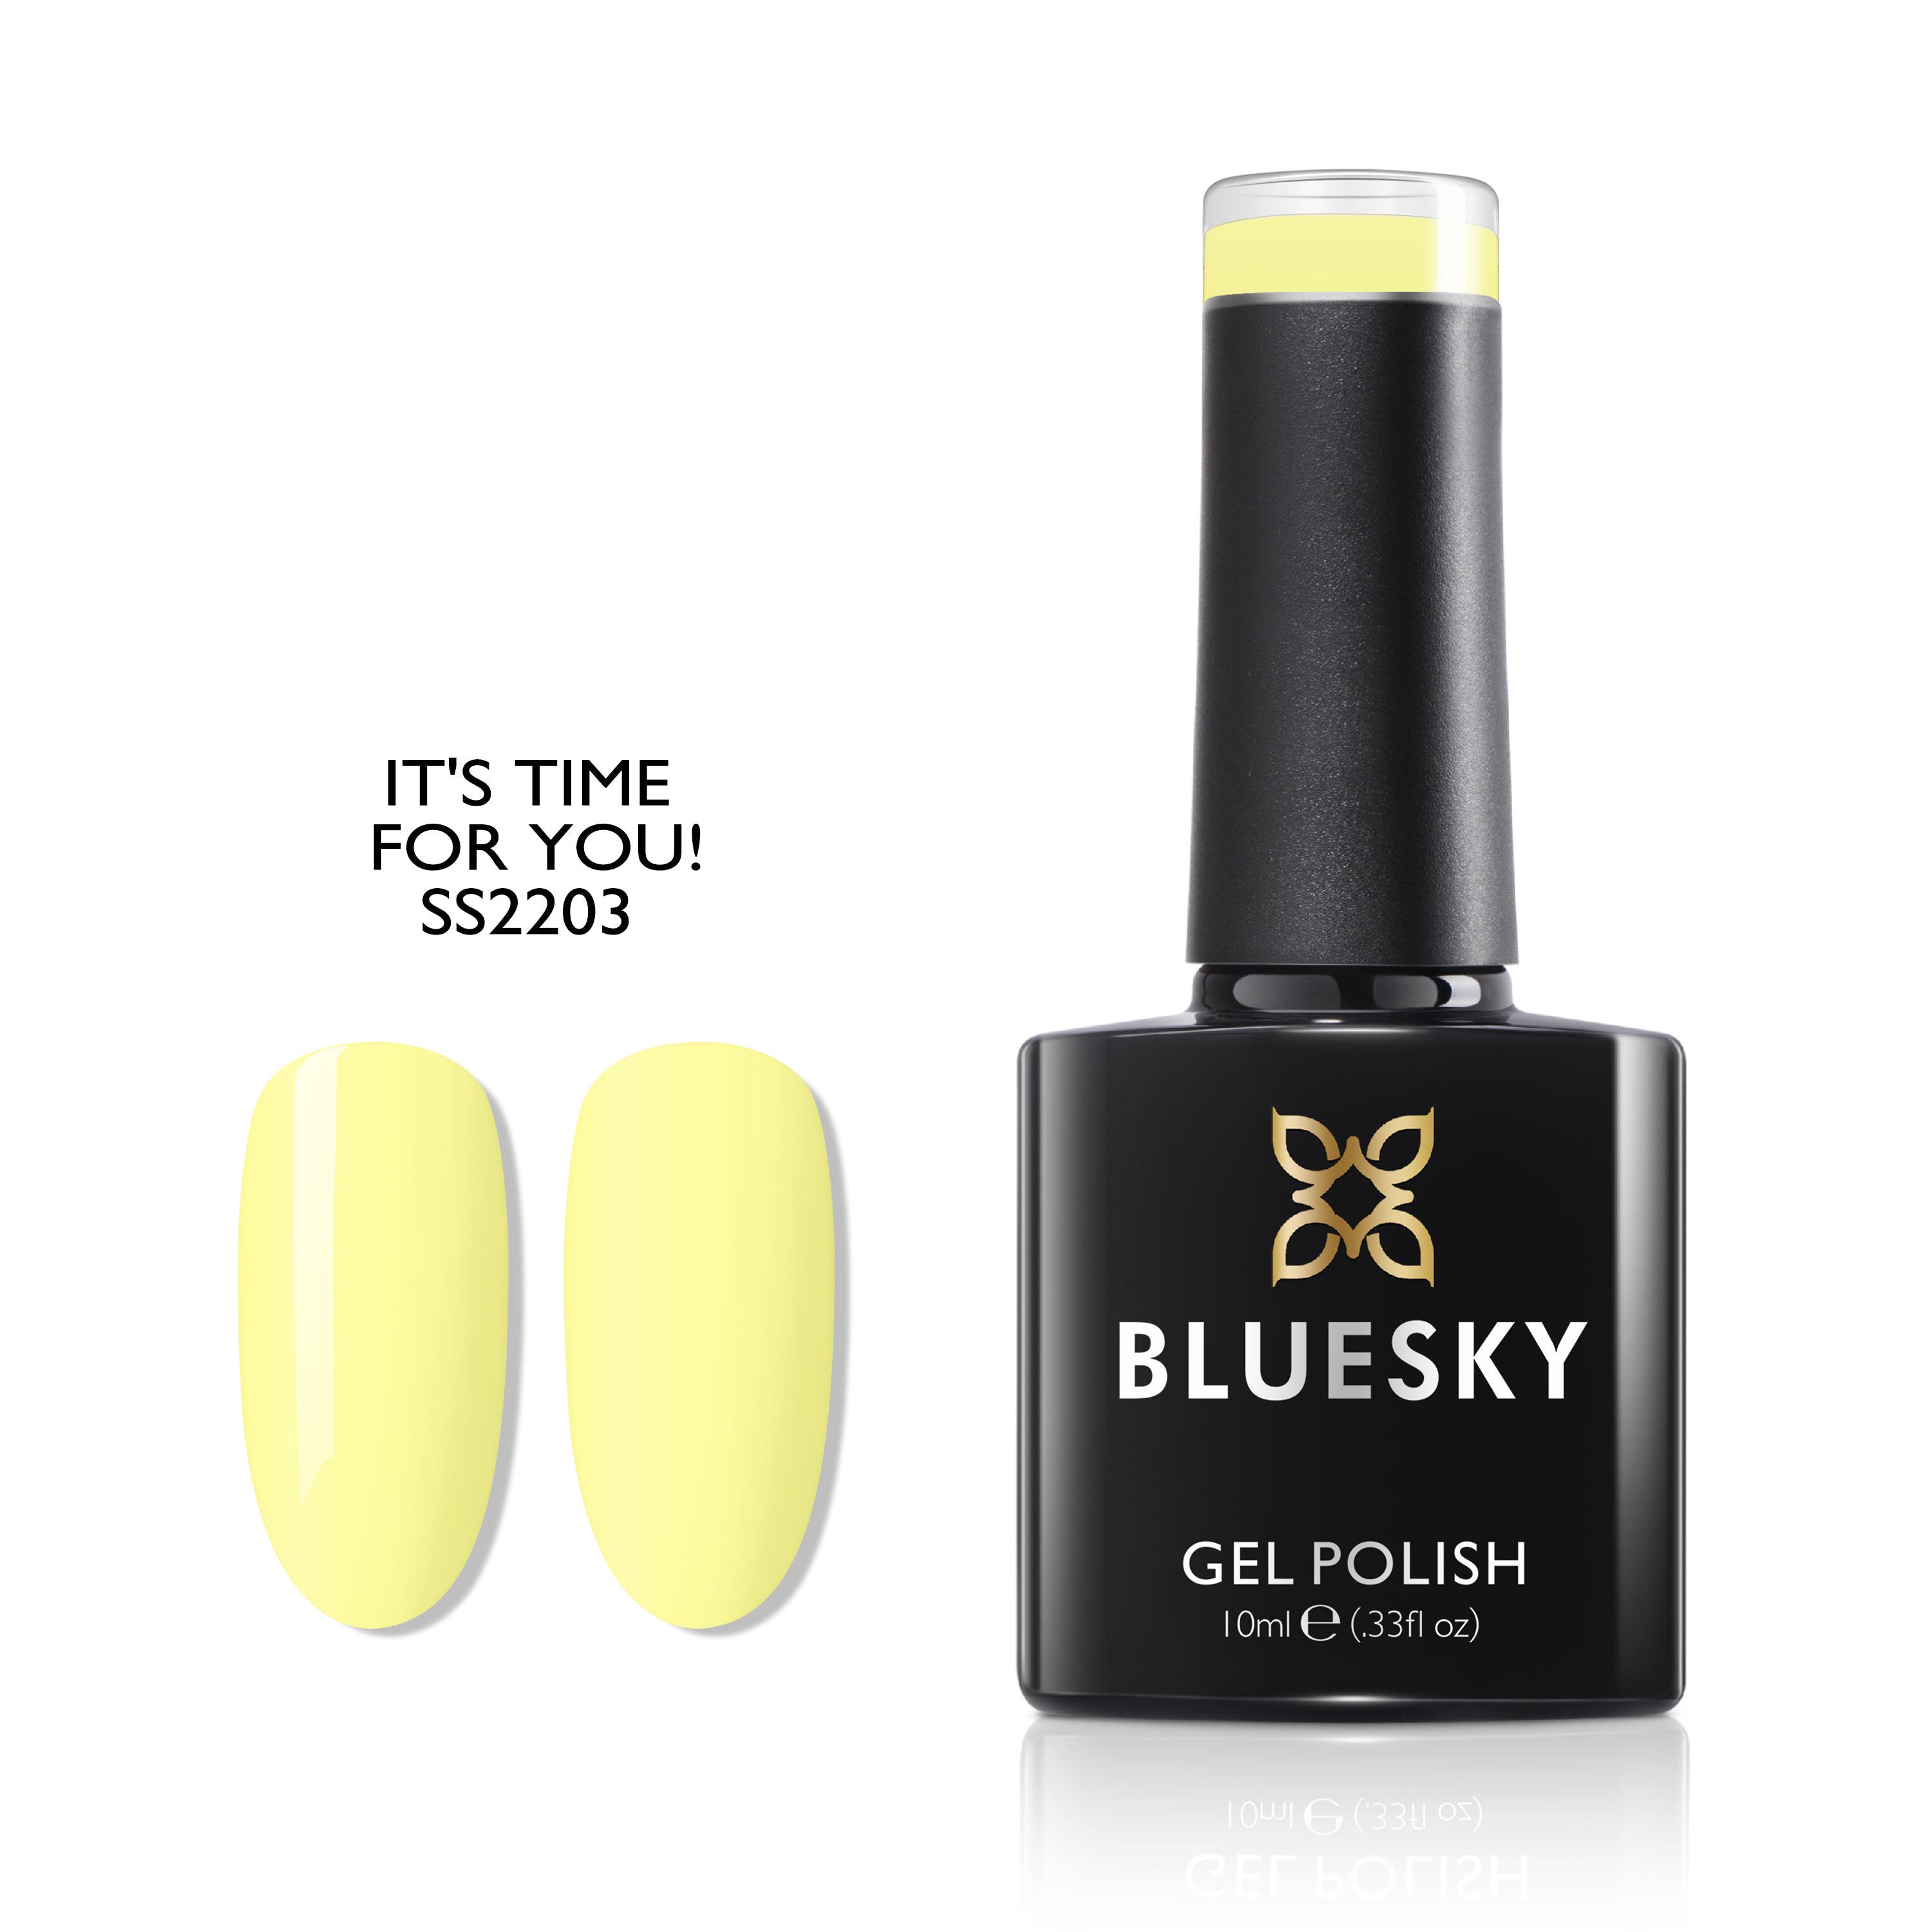 Spring 2022 | It's Time For You! | Canary Yellow Color | 10ml Gel Polish - BLUESKY